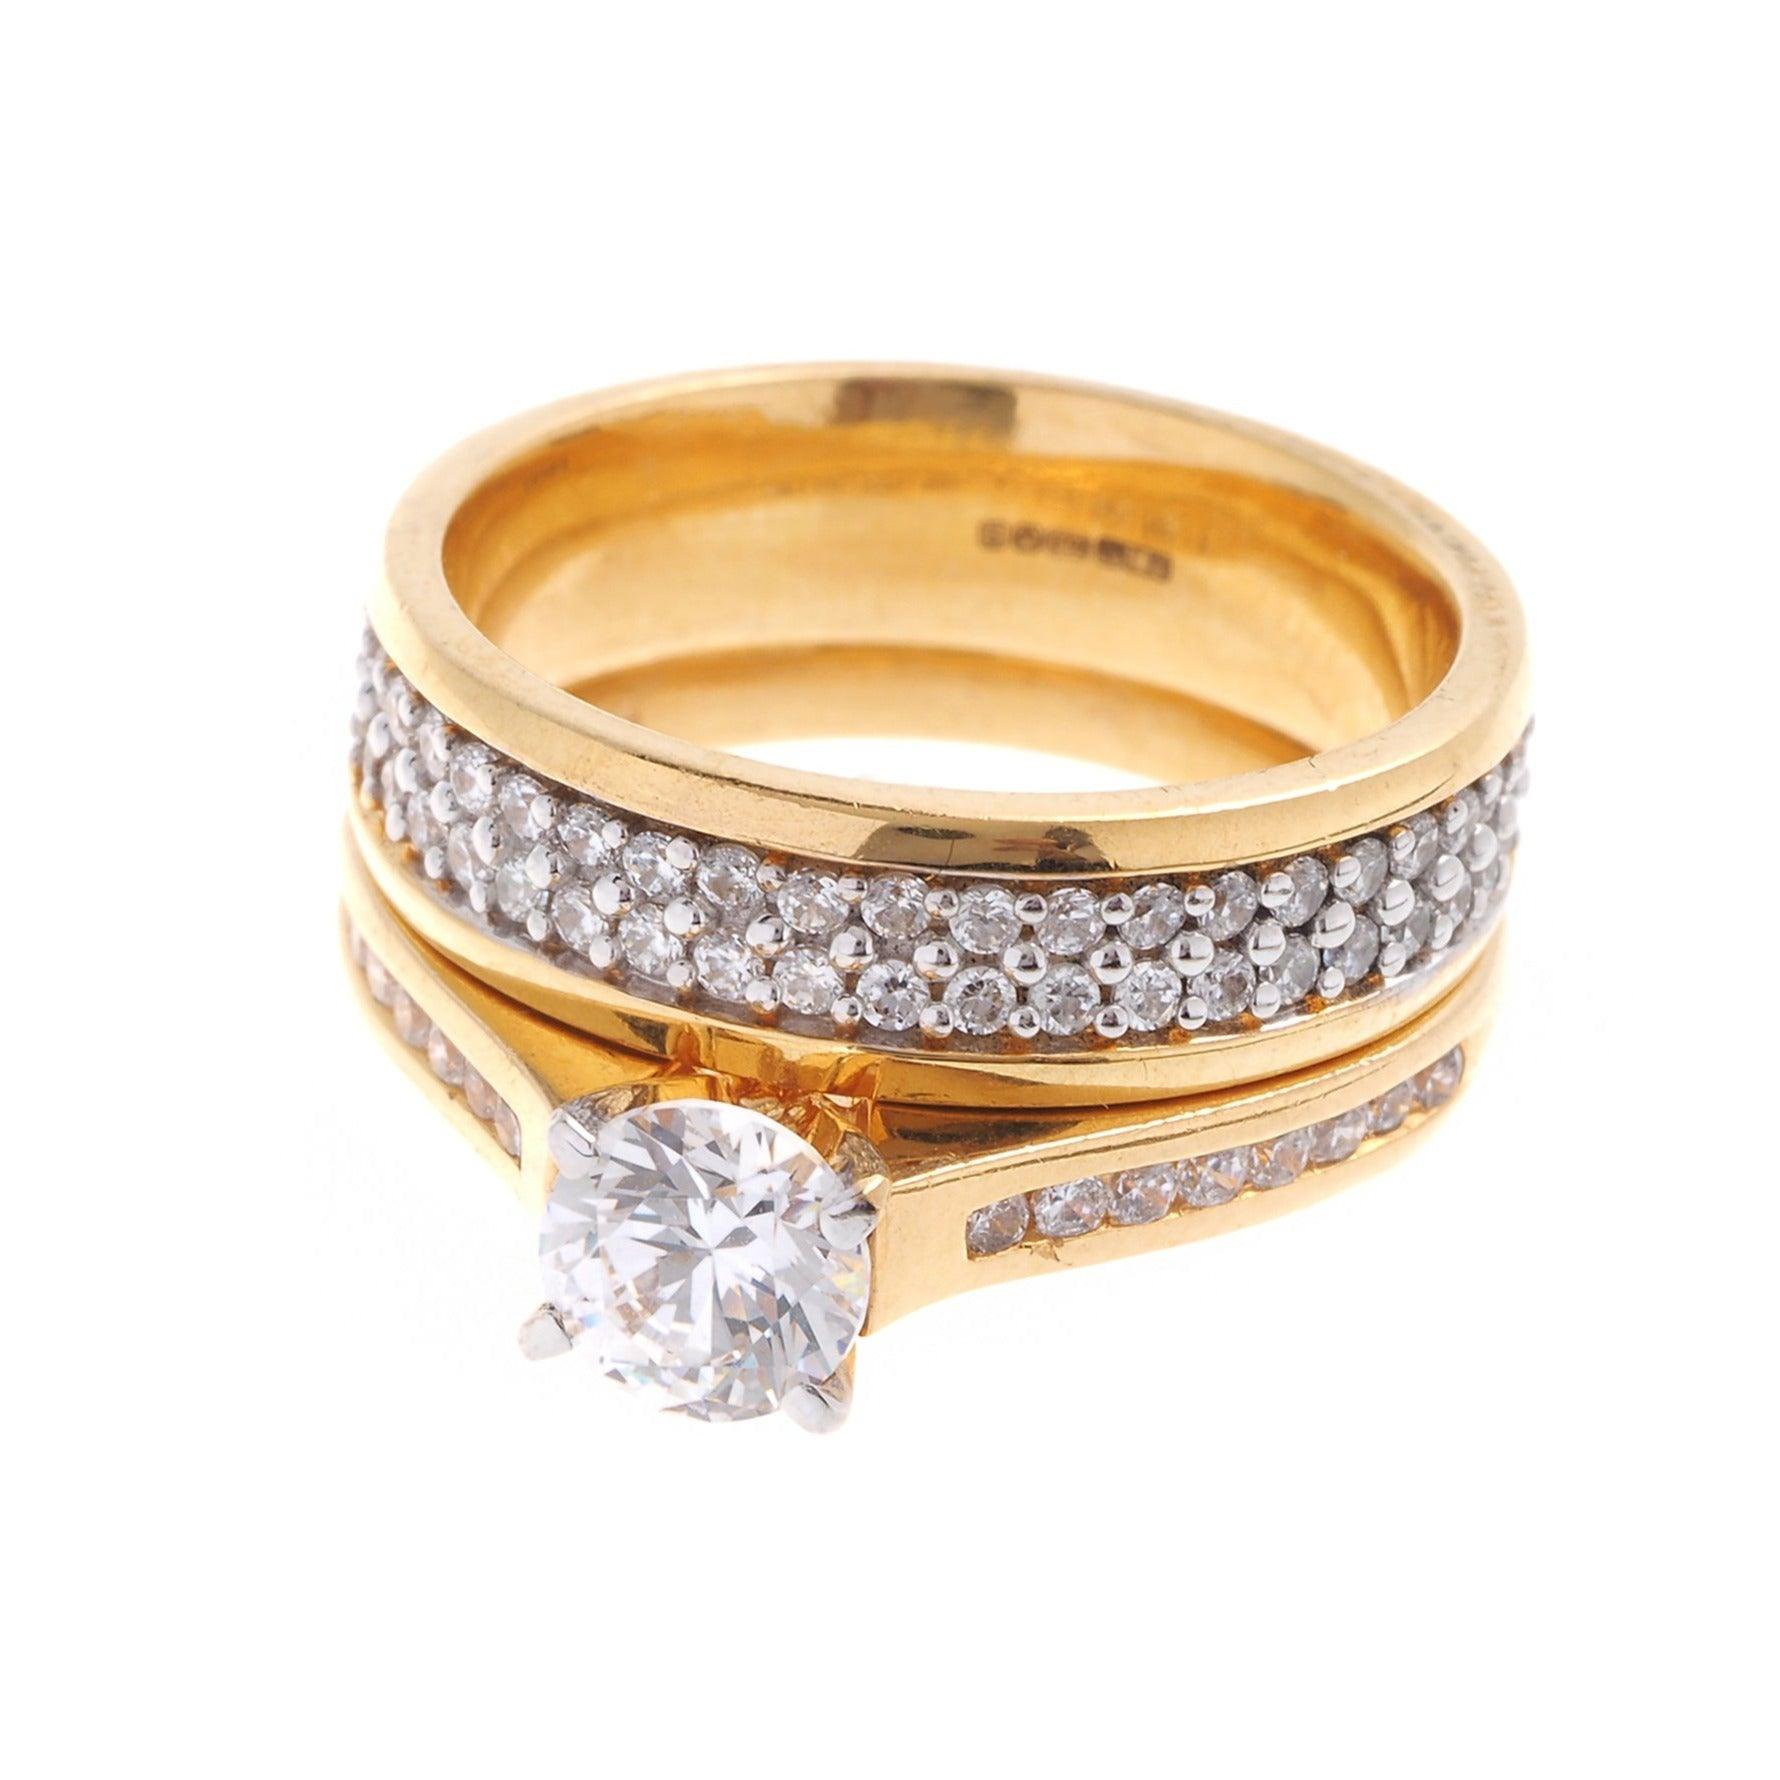 22ct Gold Cubic Zirconia Engagement Ring & Wedding Band Suite VLR1044 - Minar Jewellers